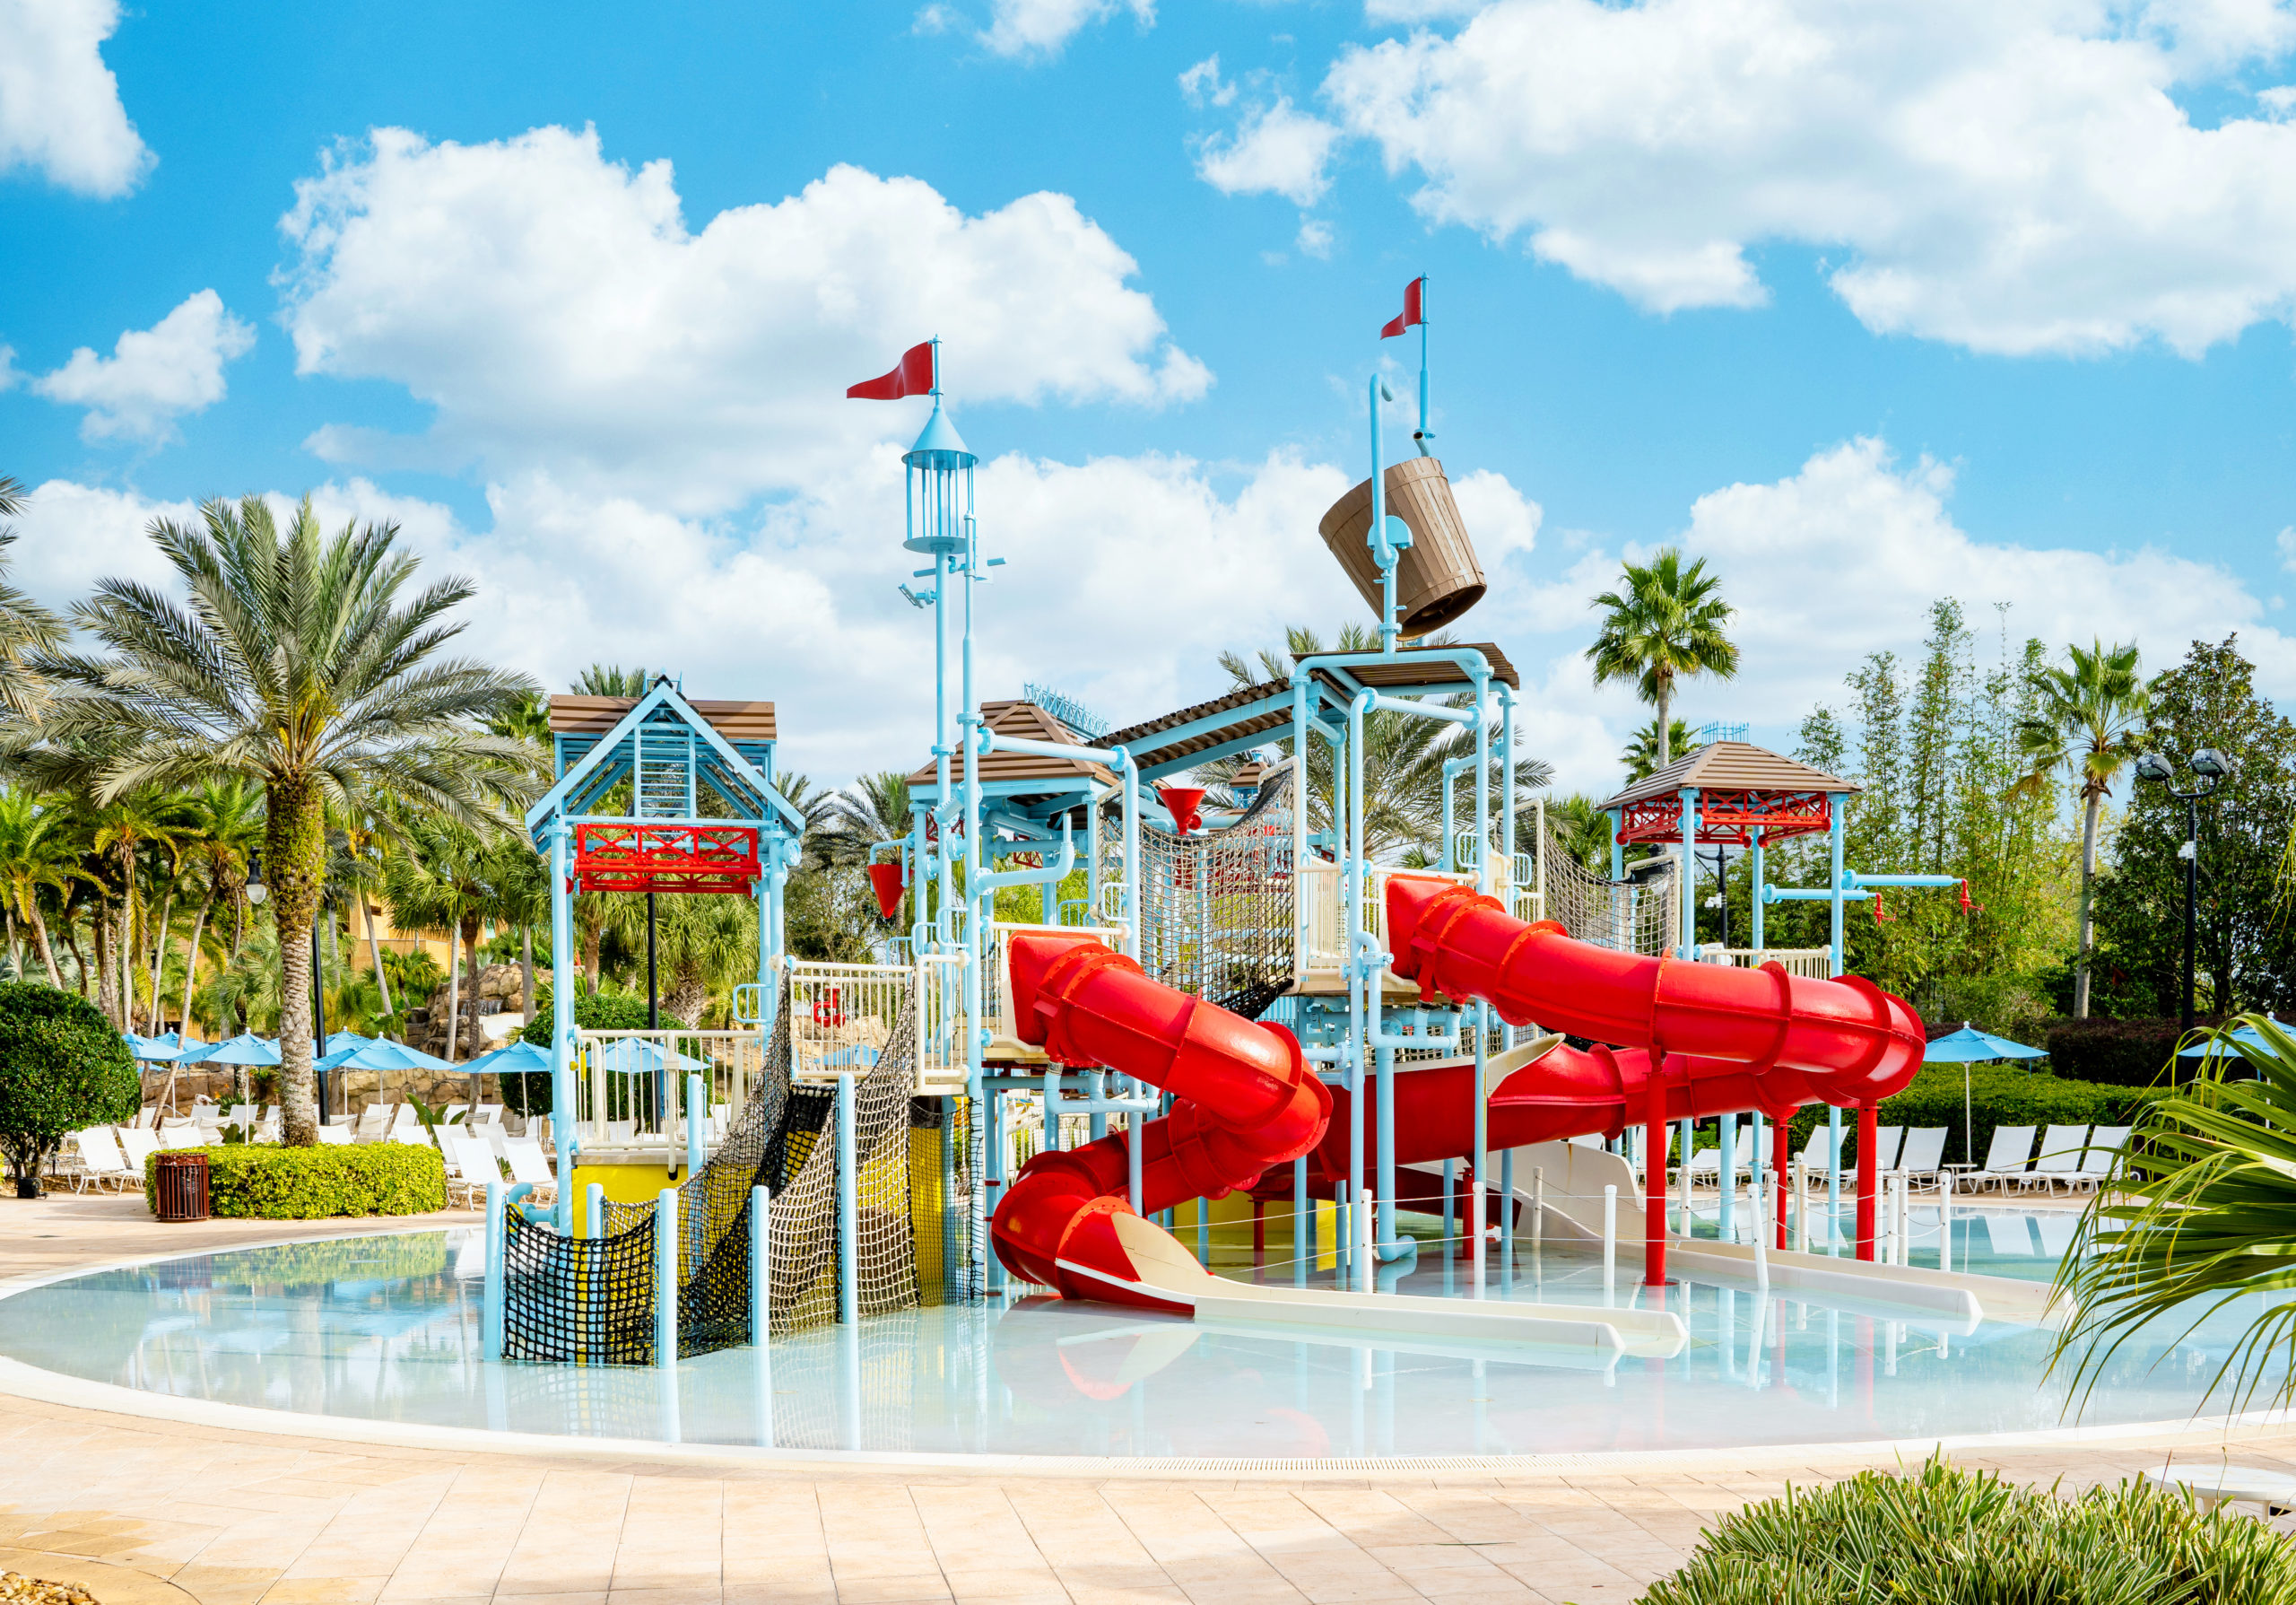 Reunion Water Park close to our Reunion Resort vacation rentals